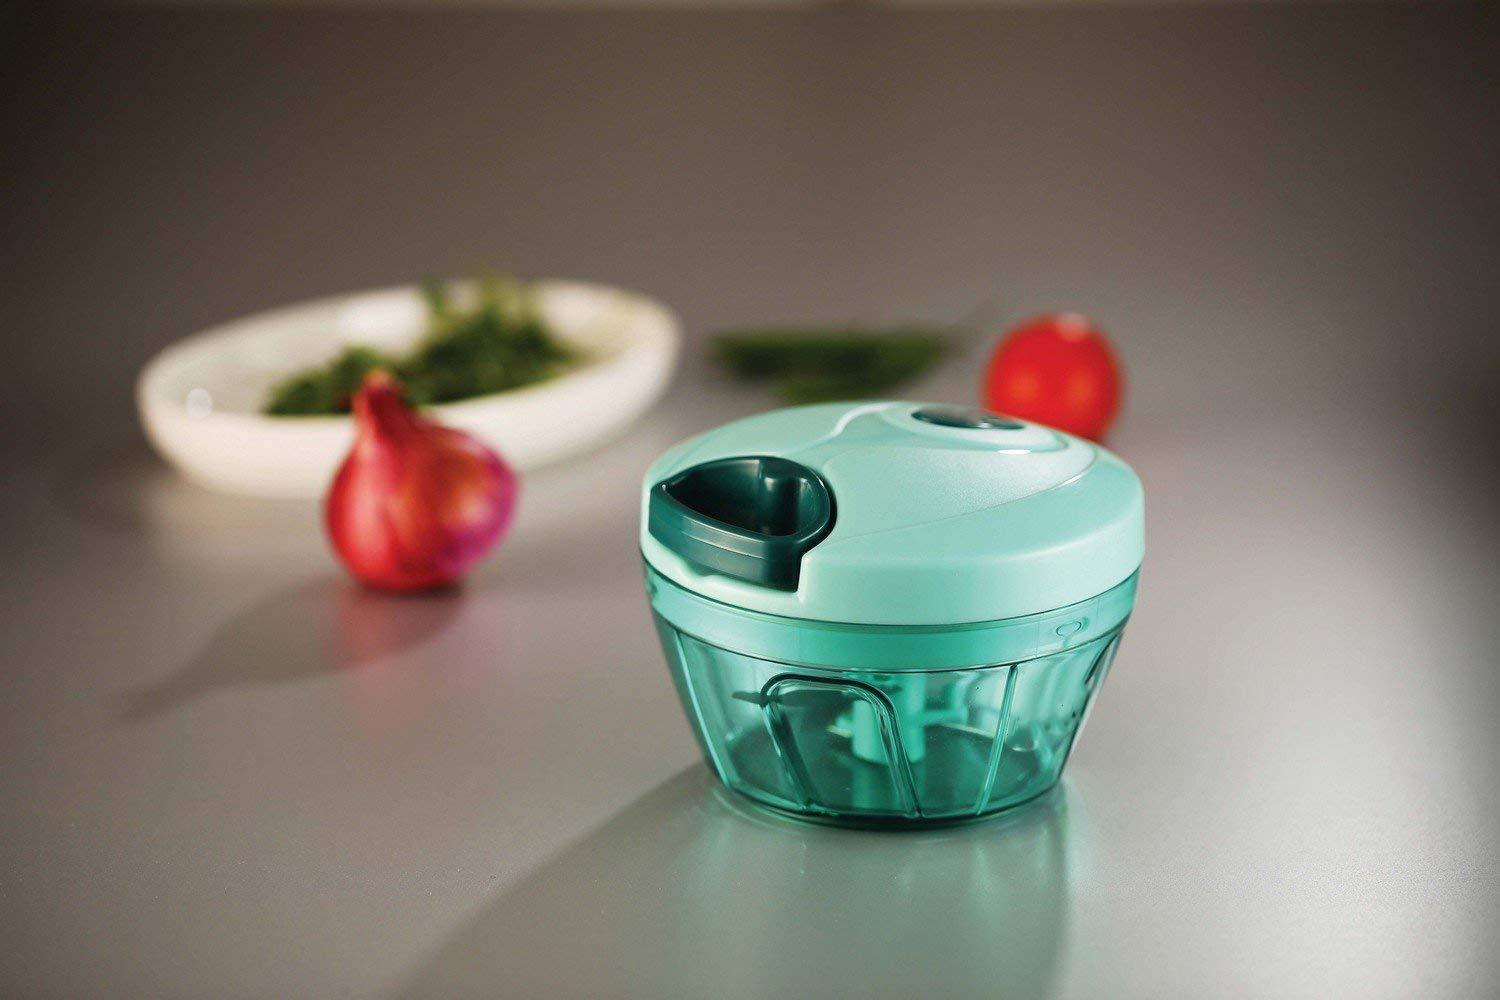 0727 Manual Handy and Compact Vegetable Chopper/Blender - SkyShopy